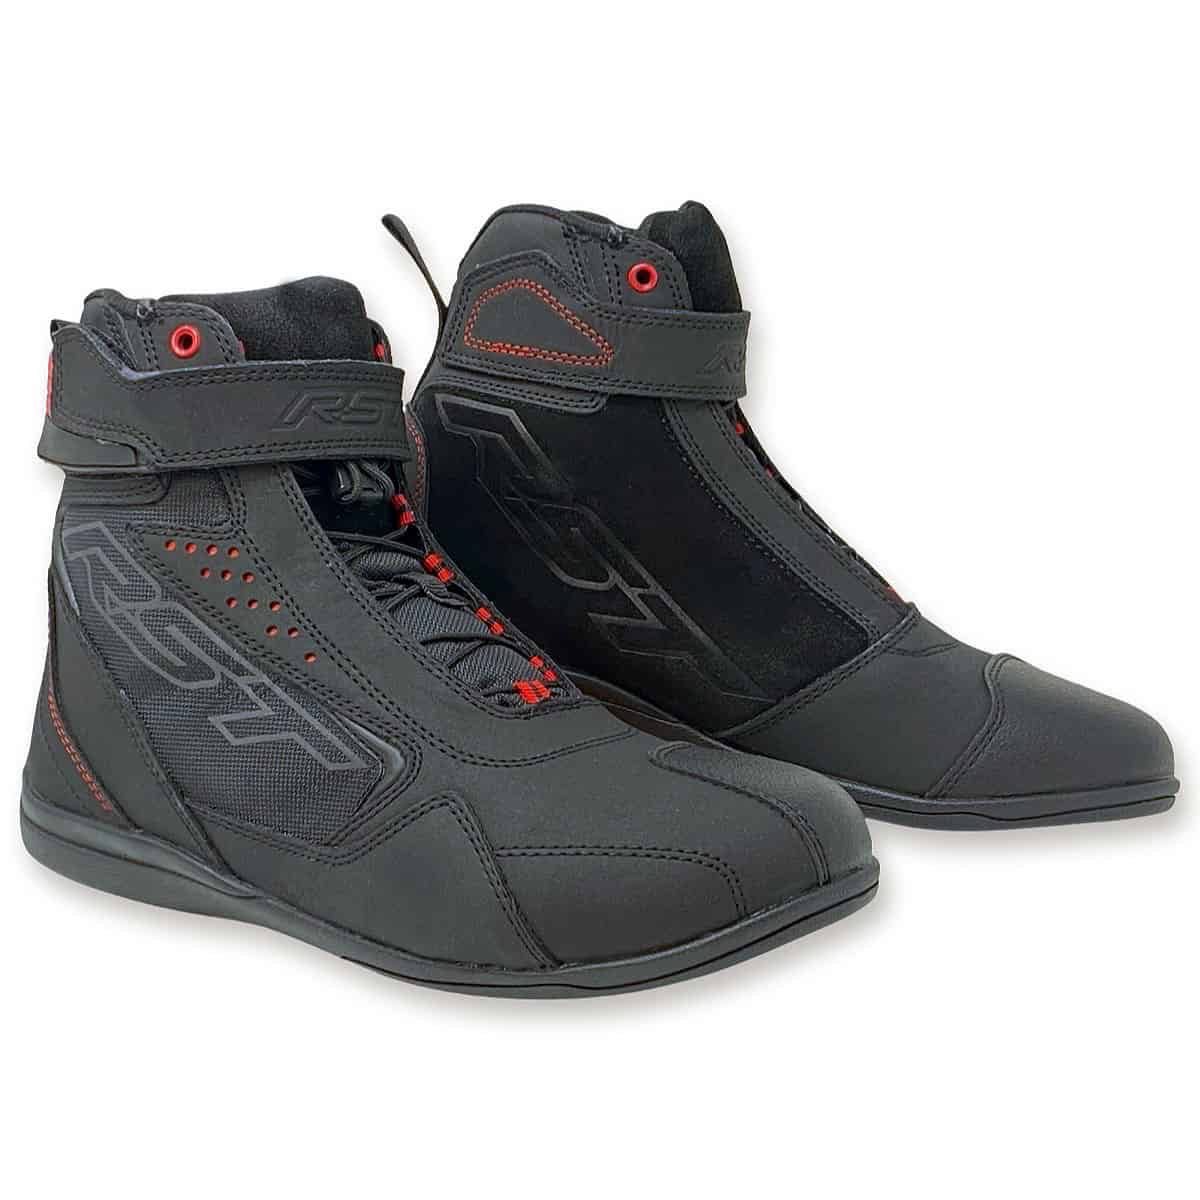 RST Frontier Boots | RST Summer Biking Boots CE-Certified Black Red ...